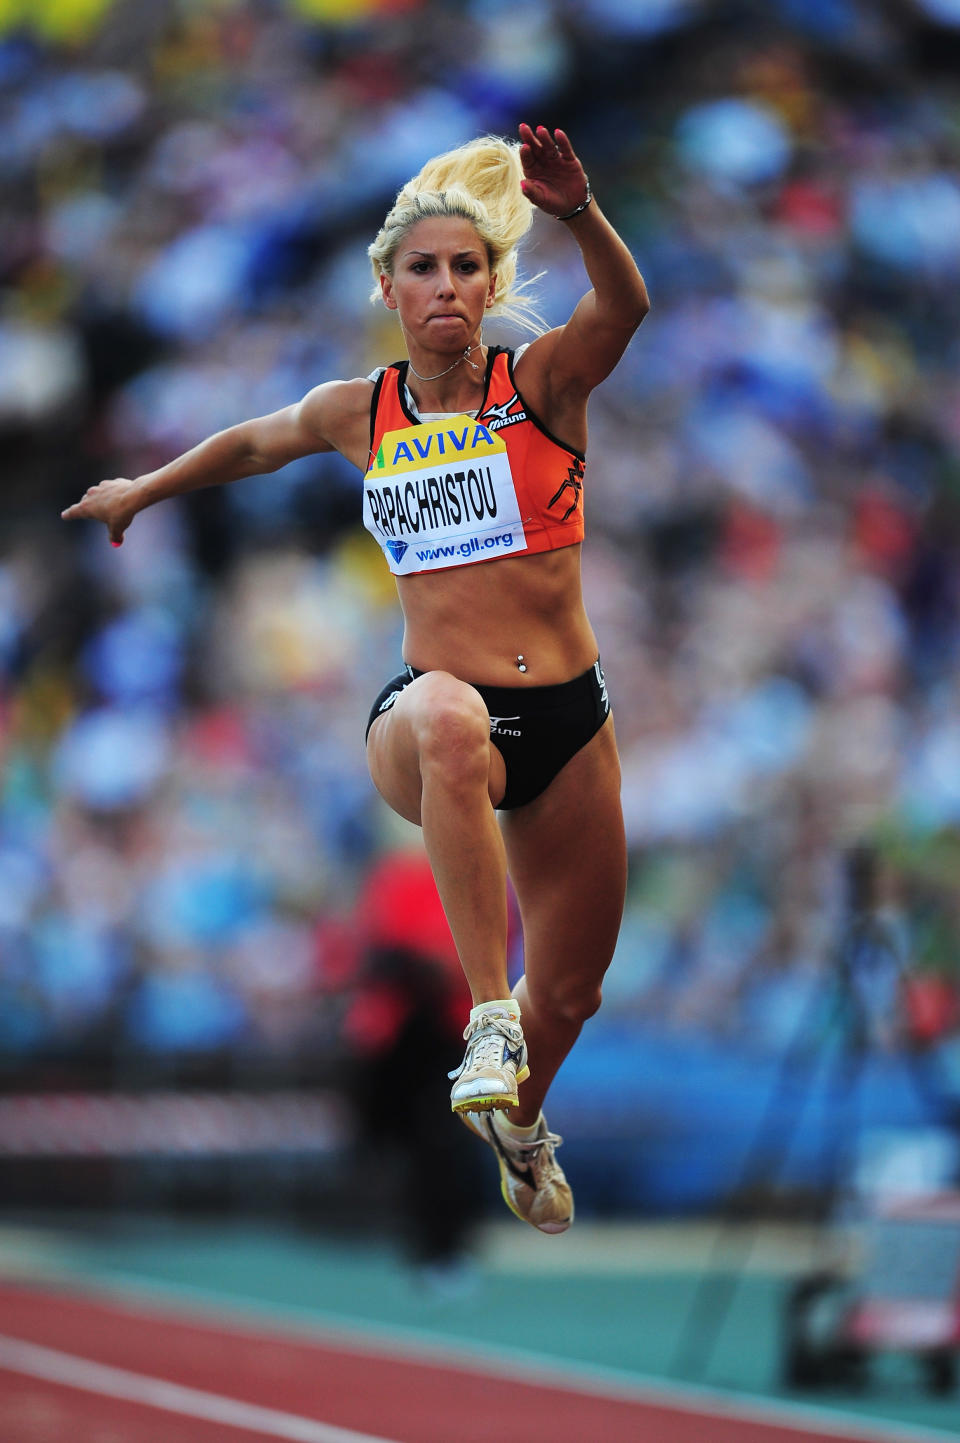 Paraskevi Papachristou of Greece competes in the Womens Triple Jump during the Aviva London Grand Prix at Crystal Palace on August 5, 2011 in London, England. (Photo by Stu Forster/Getty Images)